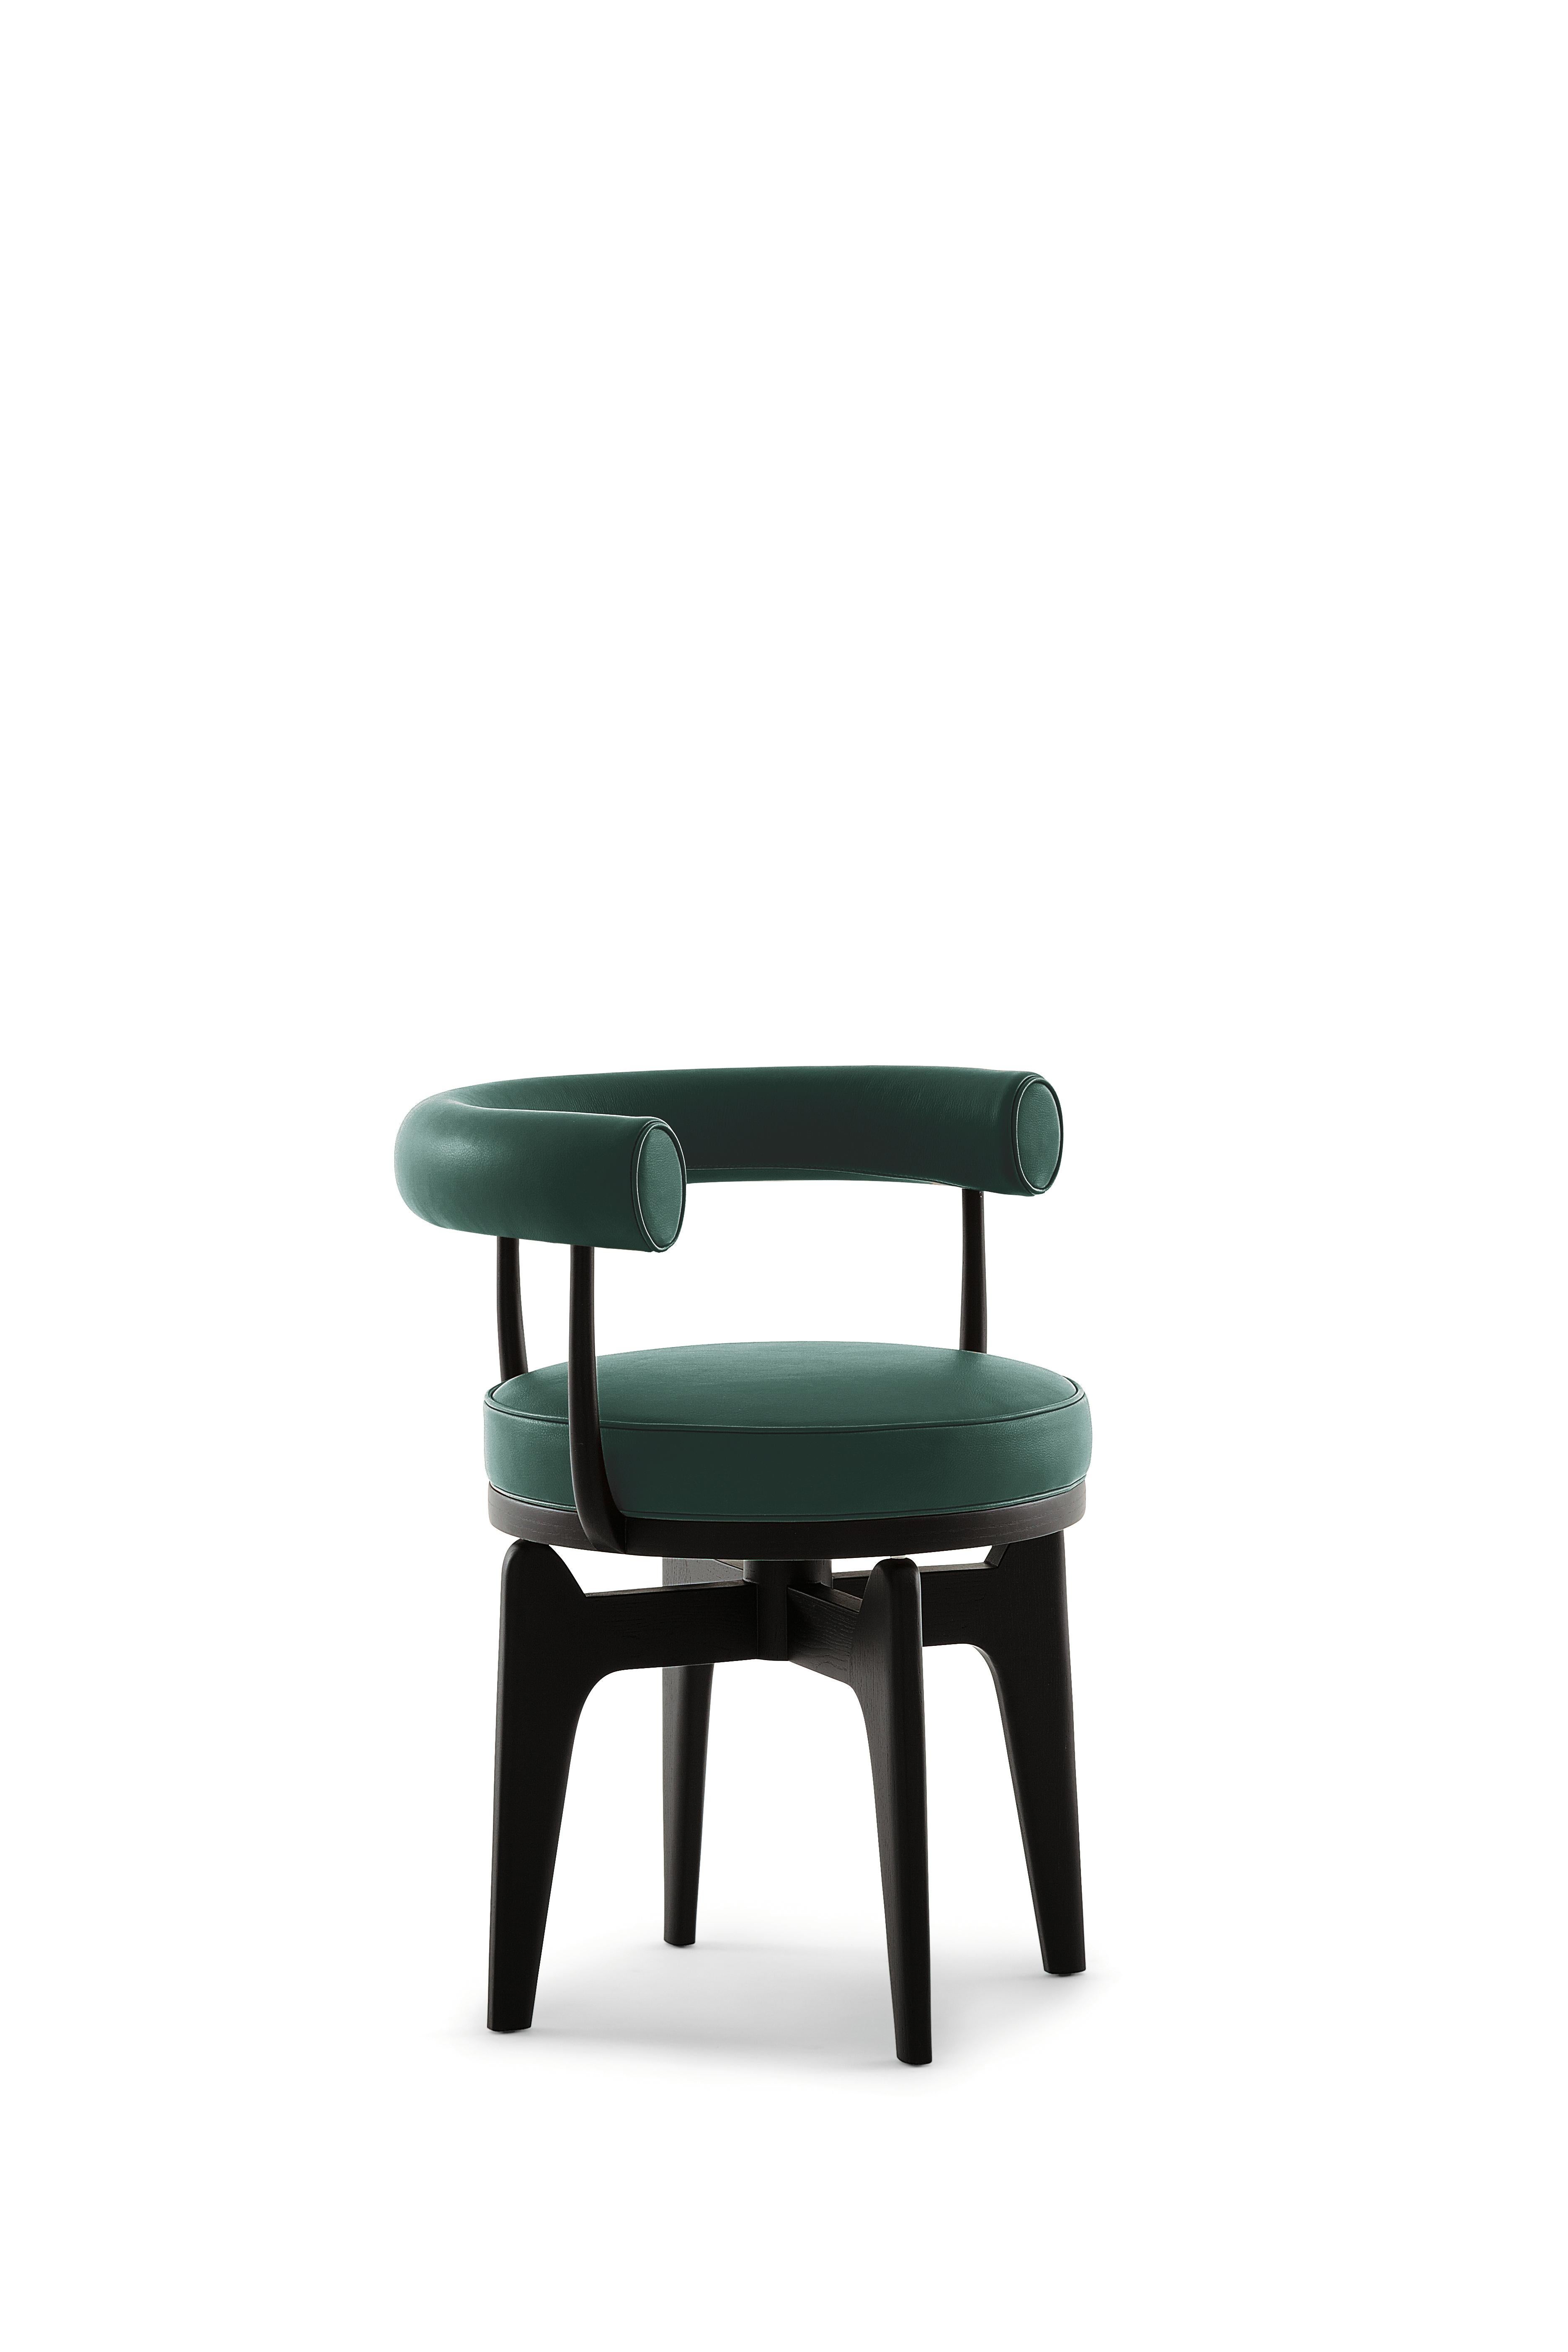 Contemporary Charlotte Perriand Indochine Armchair For Sale